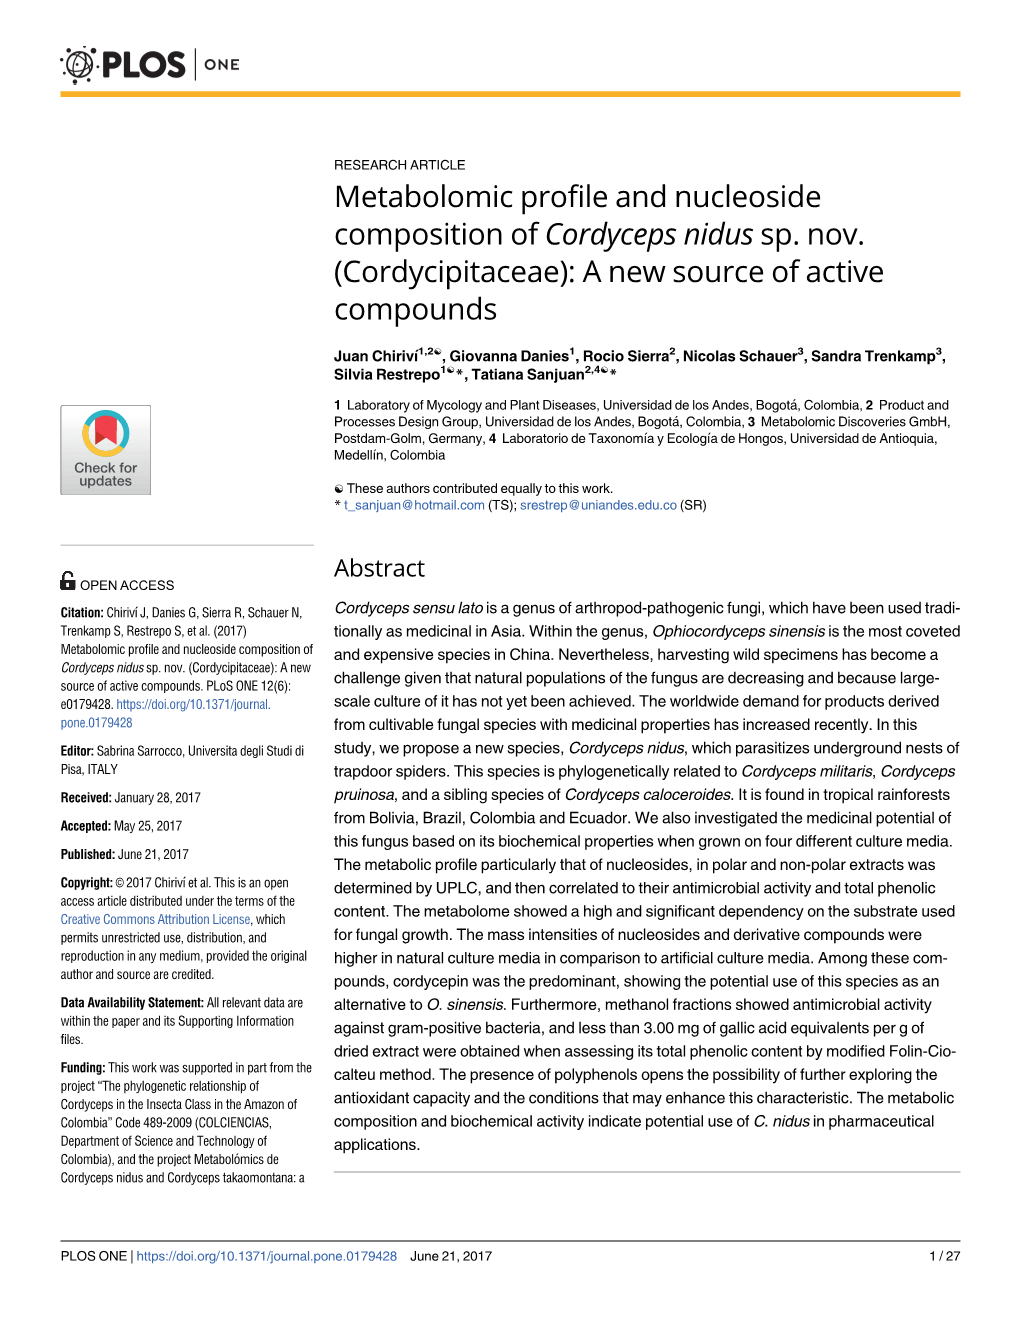 Metabolomic Profile and Nucleoside Composition of Cordyceps Nidus Sp. Nov. (Cordycipitaceae): a New Source of Active Compounds